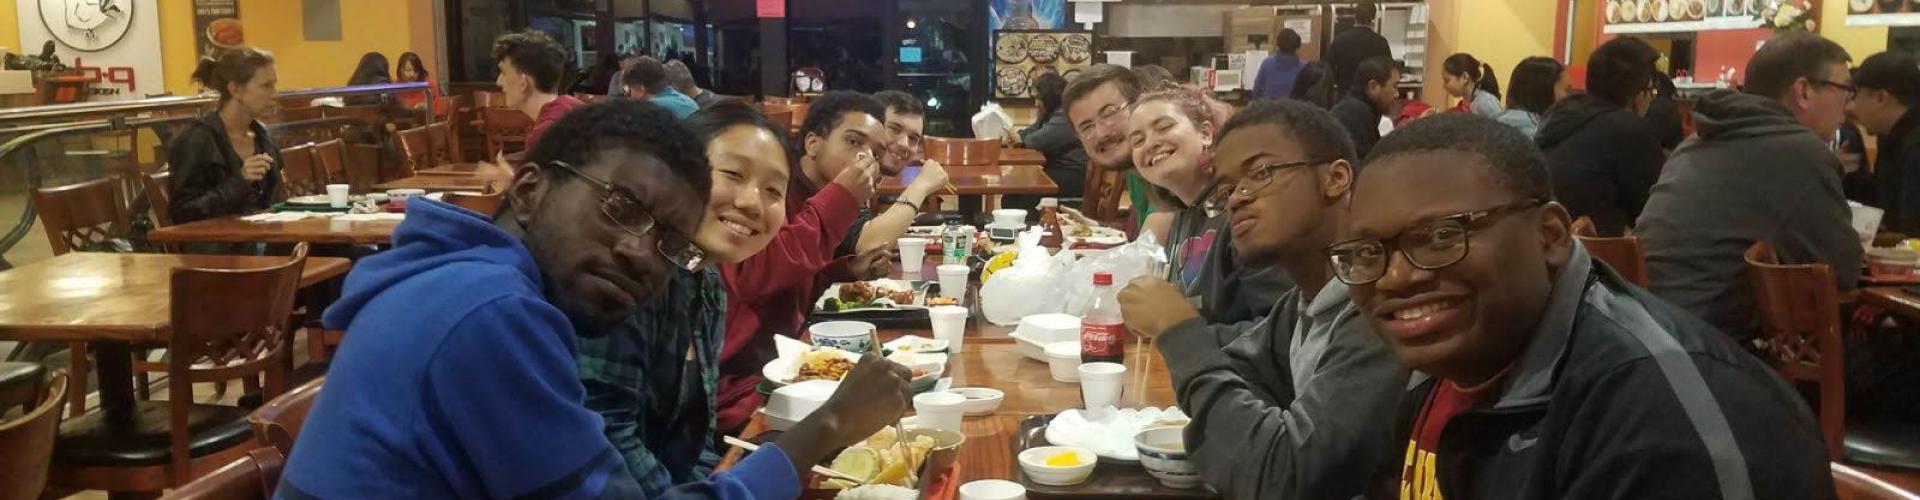 Photo of students smiling and eating at a restaurant.